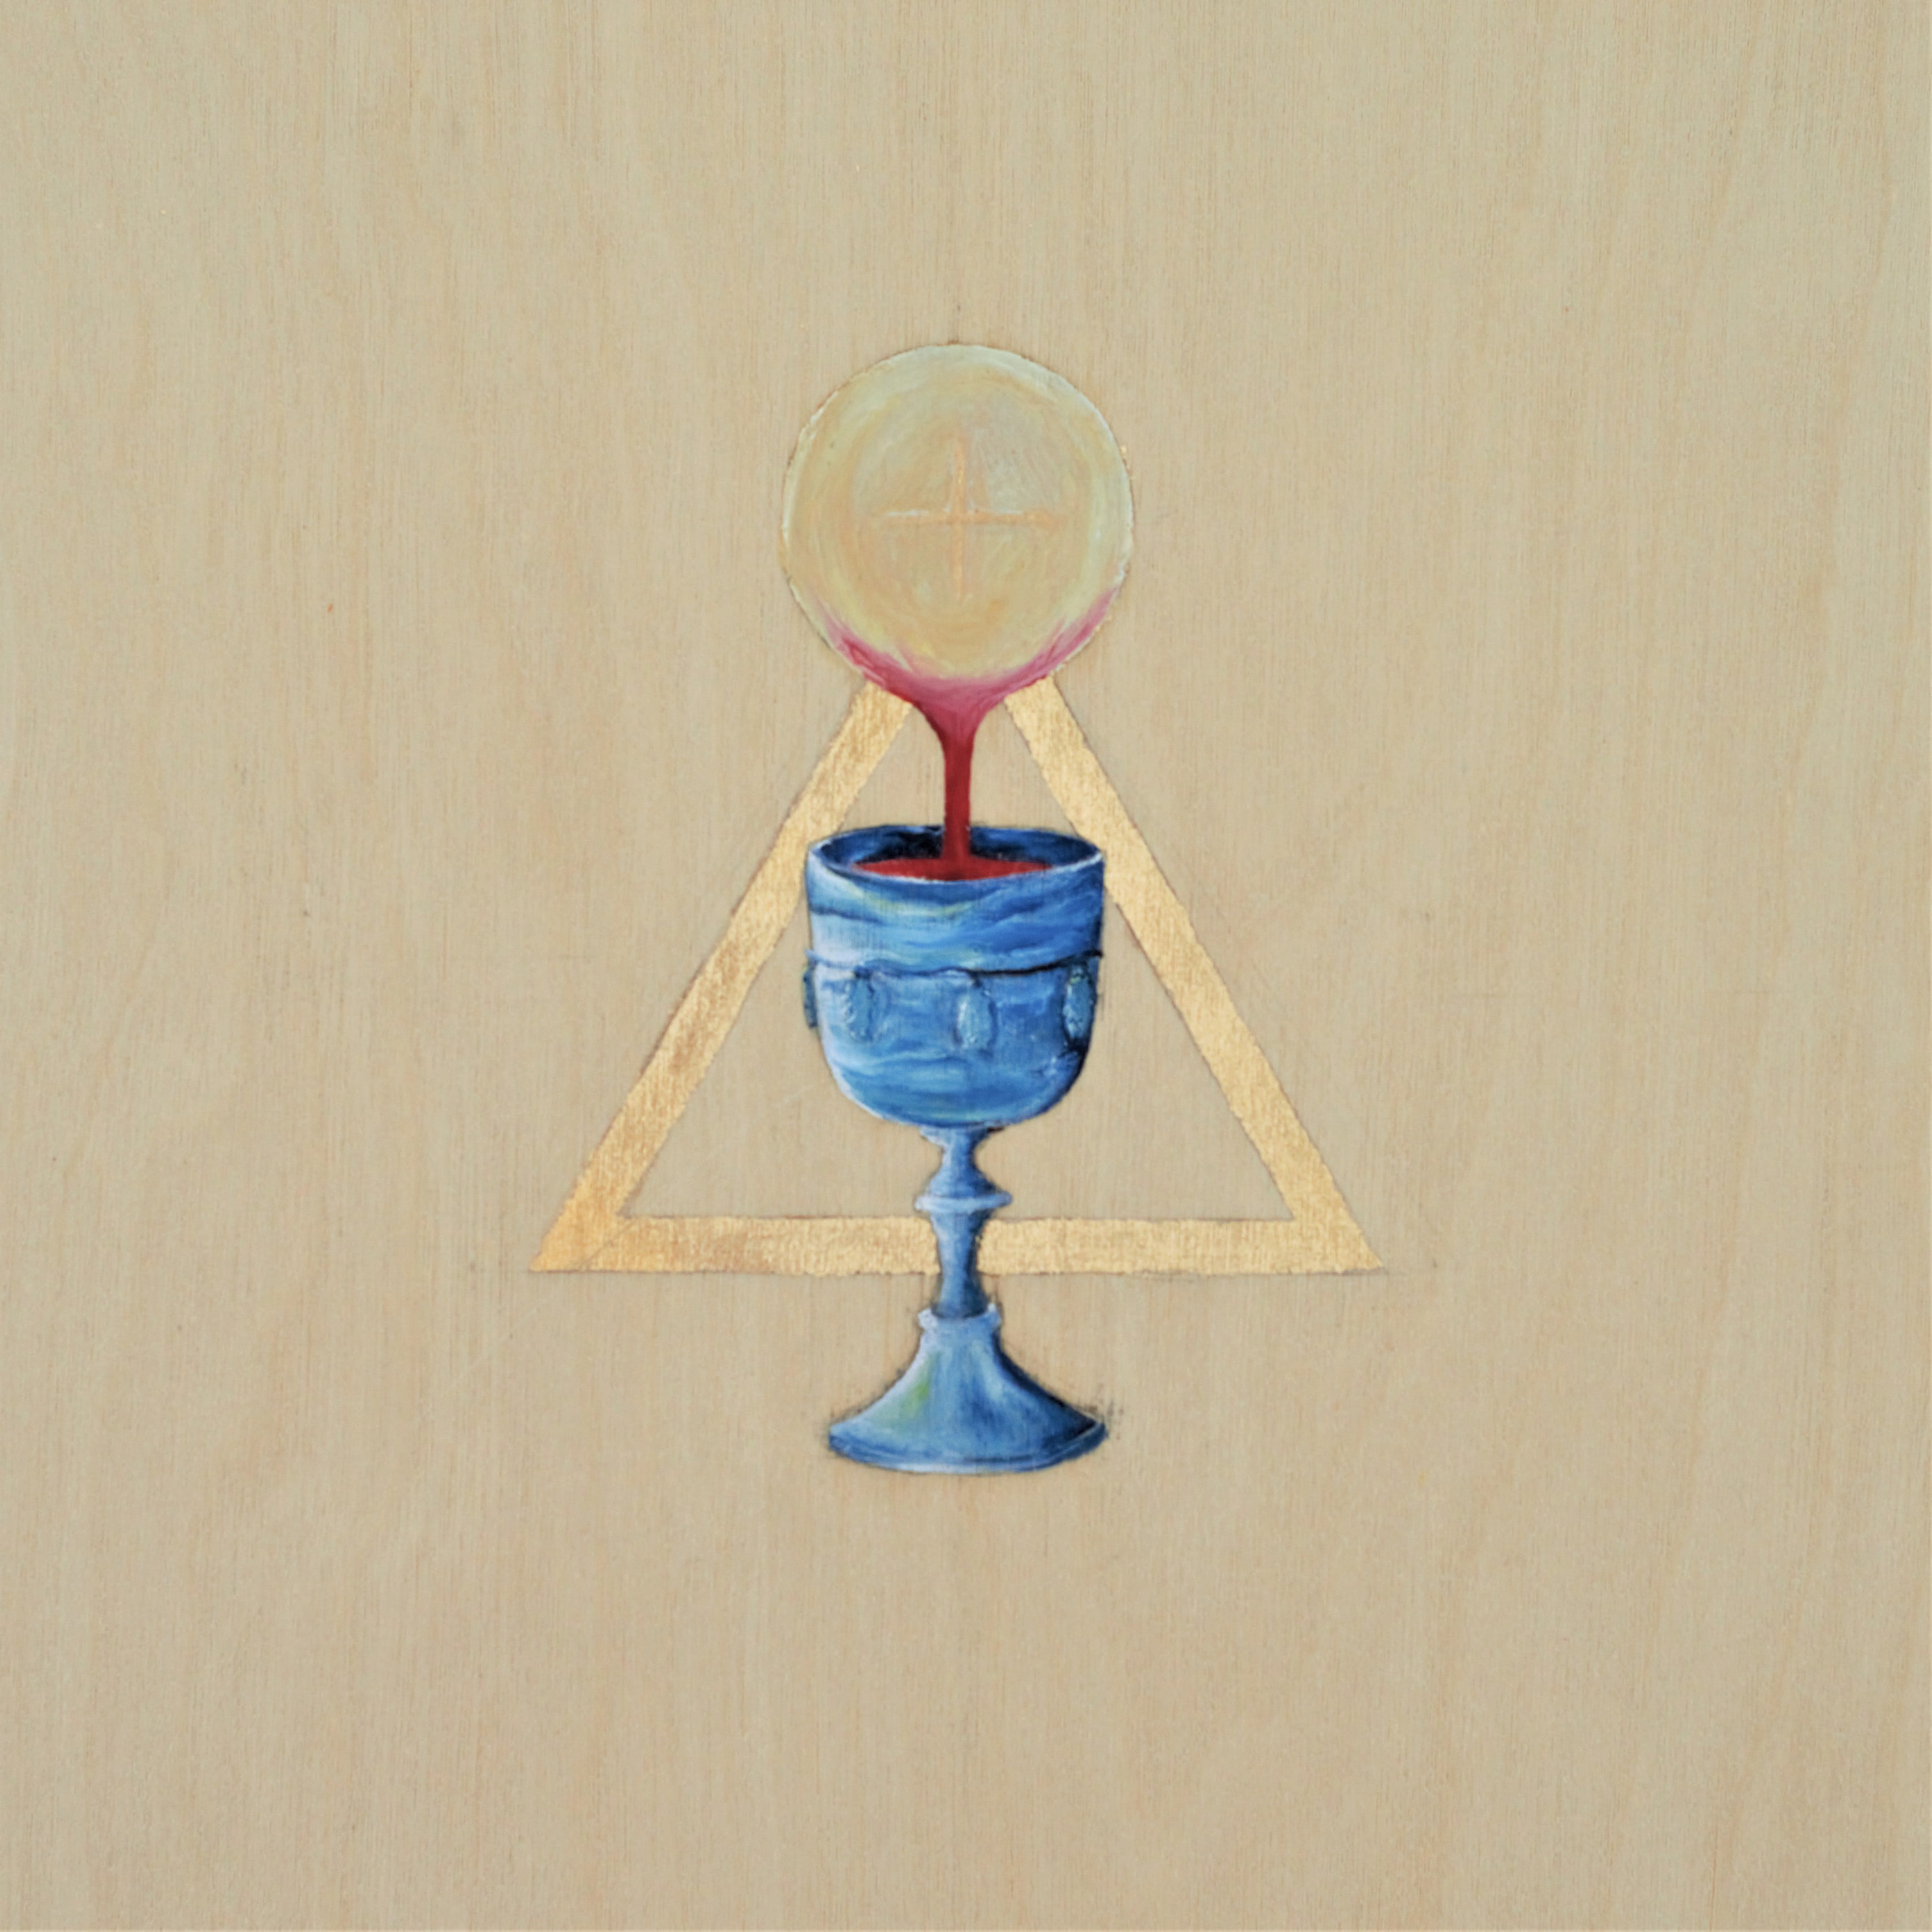 An icon in gold leaf and oils on birch, depicting a communion wafer dipped into a cup of wine